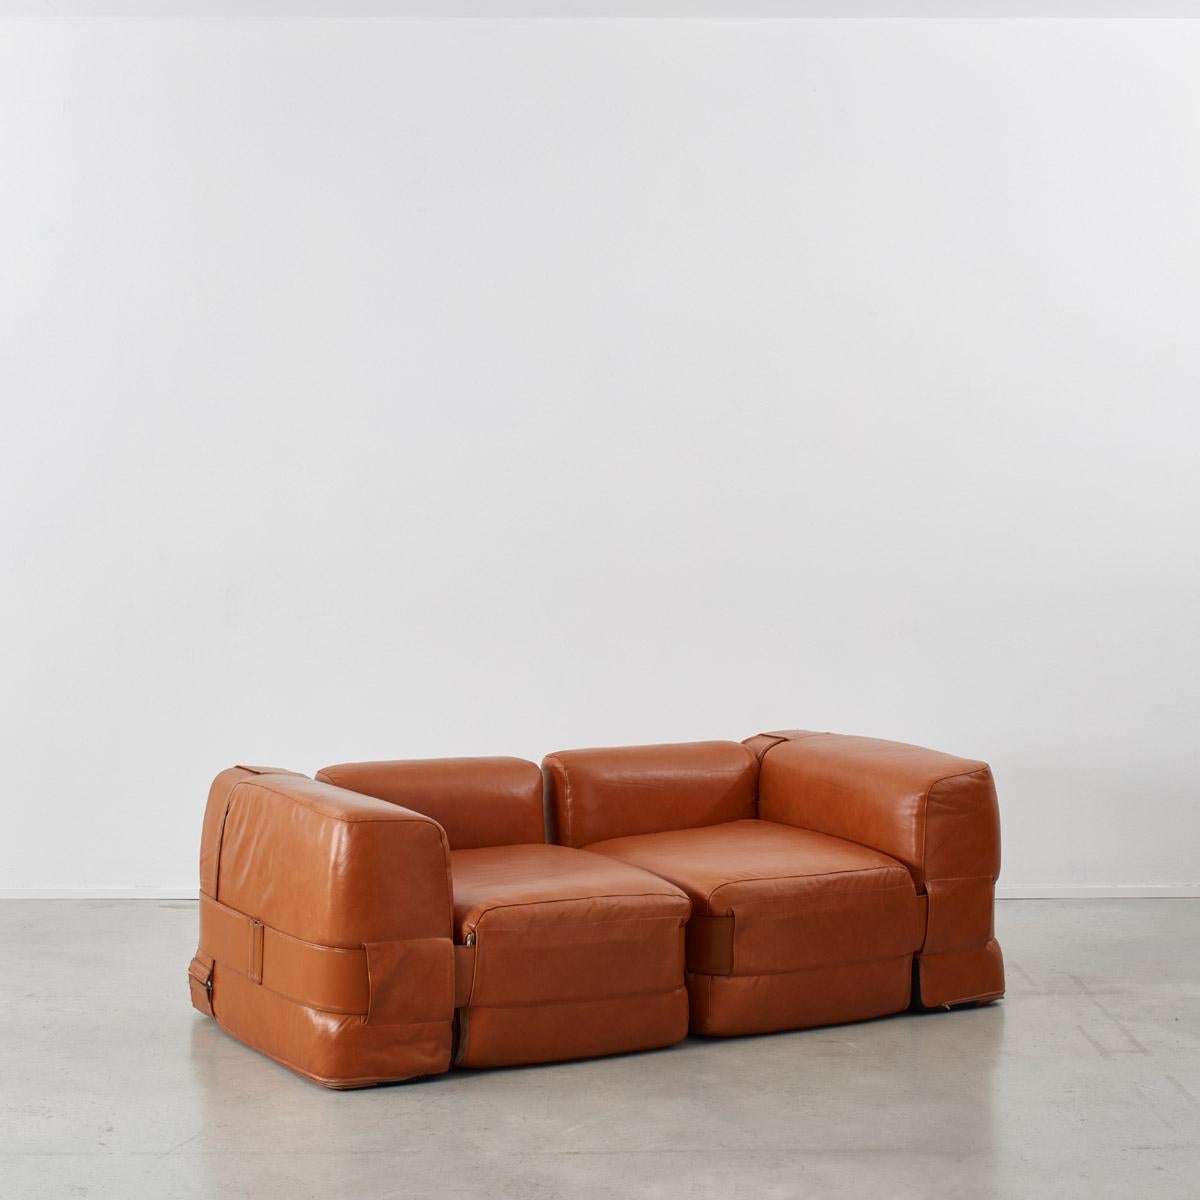 Italian architect Mario Bellini is well known for creating monumental and conceptual pieces of design, such as the Camaleonda sofa (1971) and Il Colonnato table (1977). His architecture and design work have won him many career accolades, working